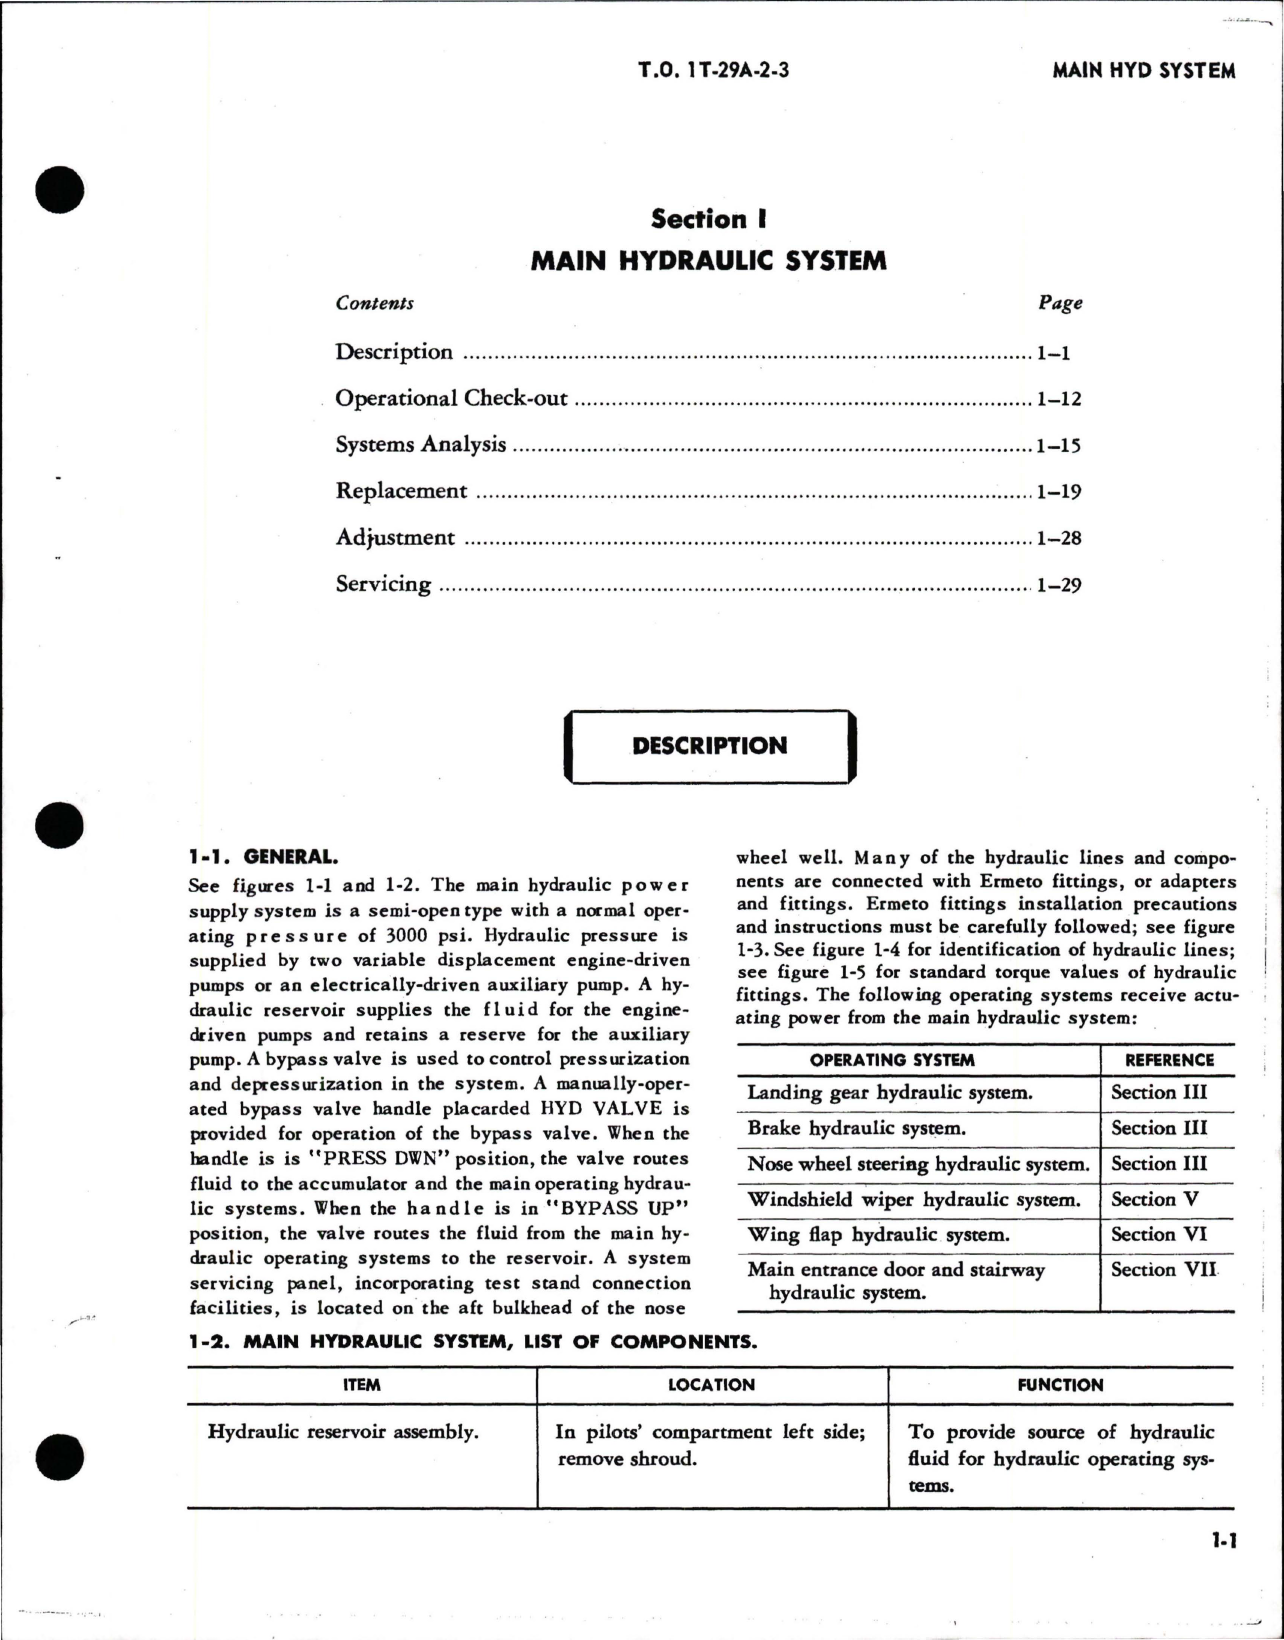 Sample page 9 from AirCorps Library document: Maintenance Manual for Hydraulic Systems for T-29A, T-29B, T-29C and T-29D